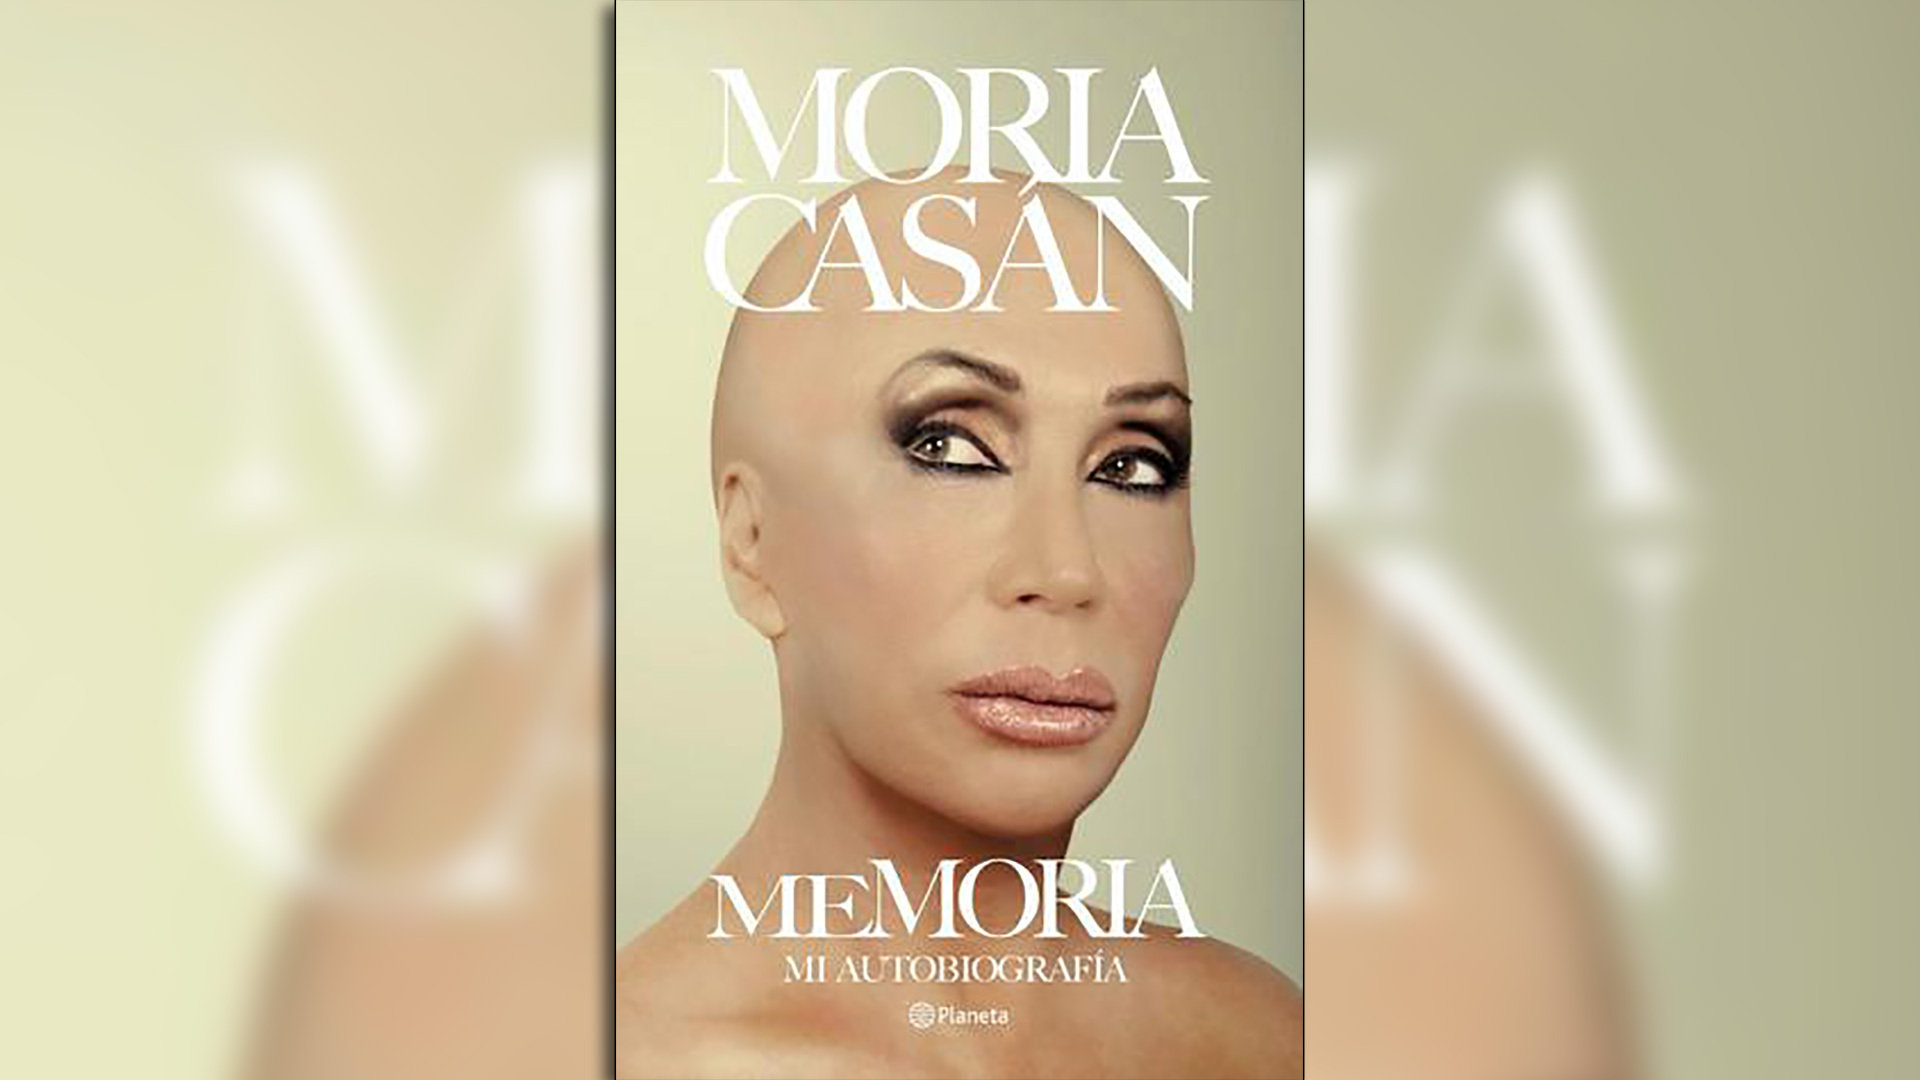 In 2012, Casán presented "Memory" at the Book Fair.